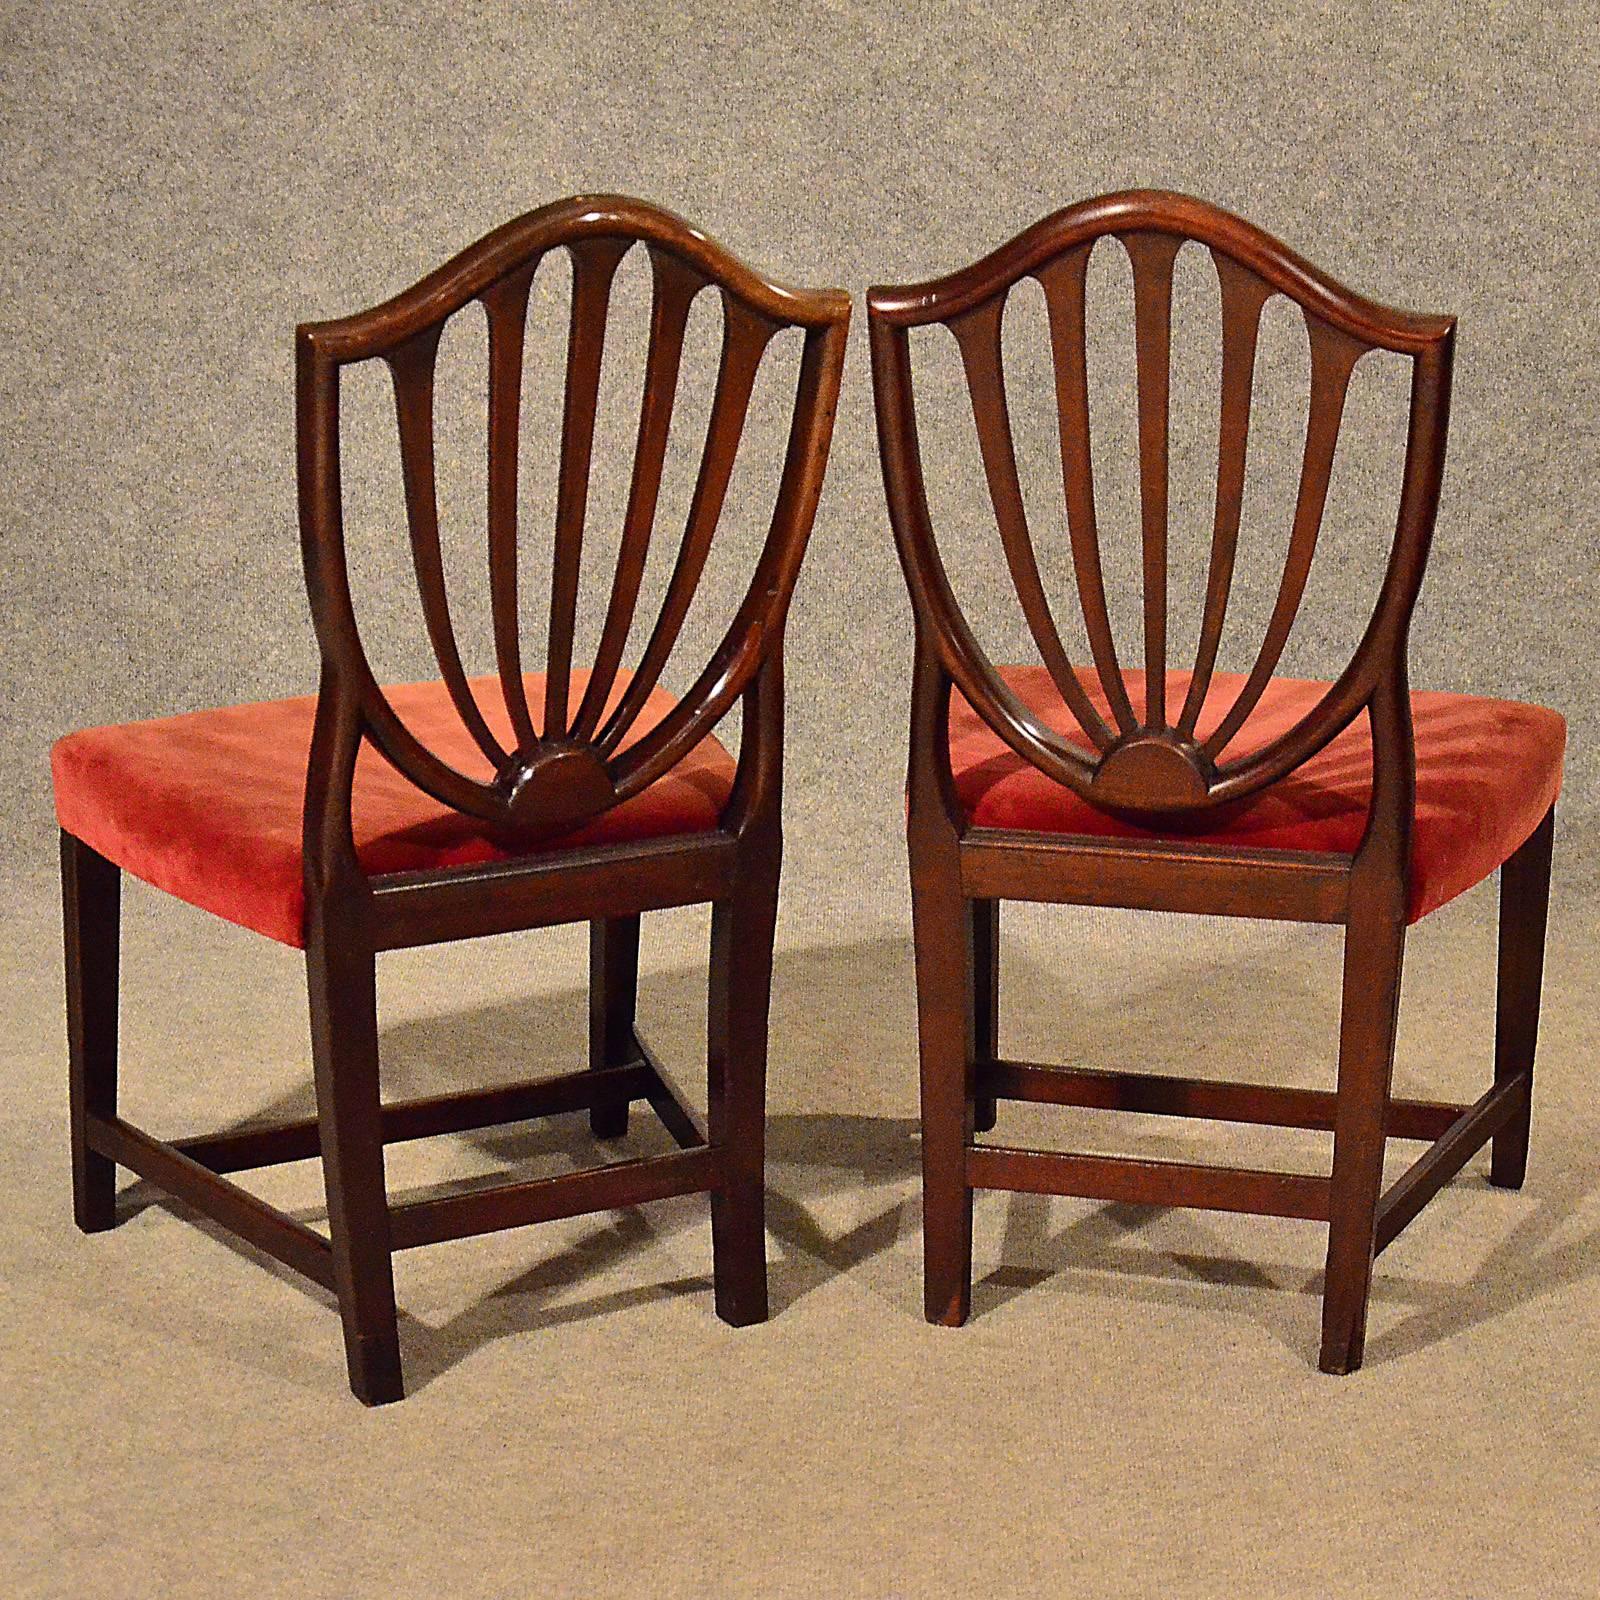 Early 19th Century Pair of Wide Side Dining Shield Chairs English Georgian Hepplewhite, circa 1800